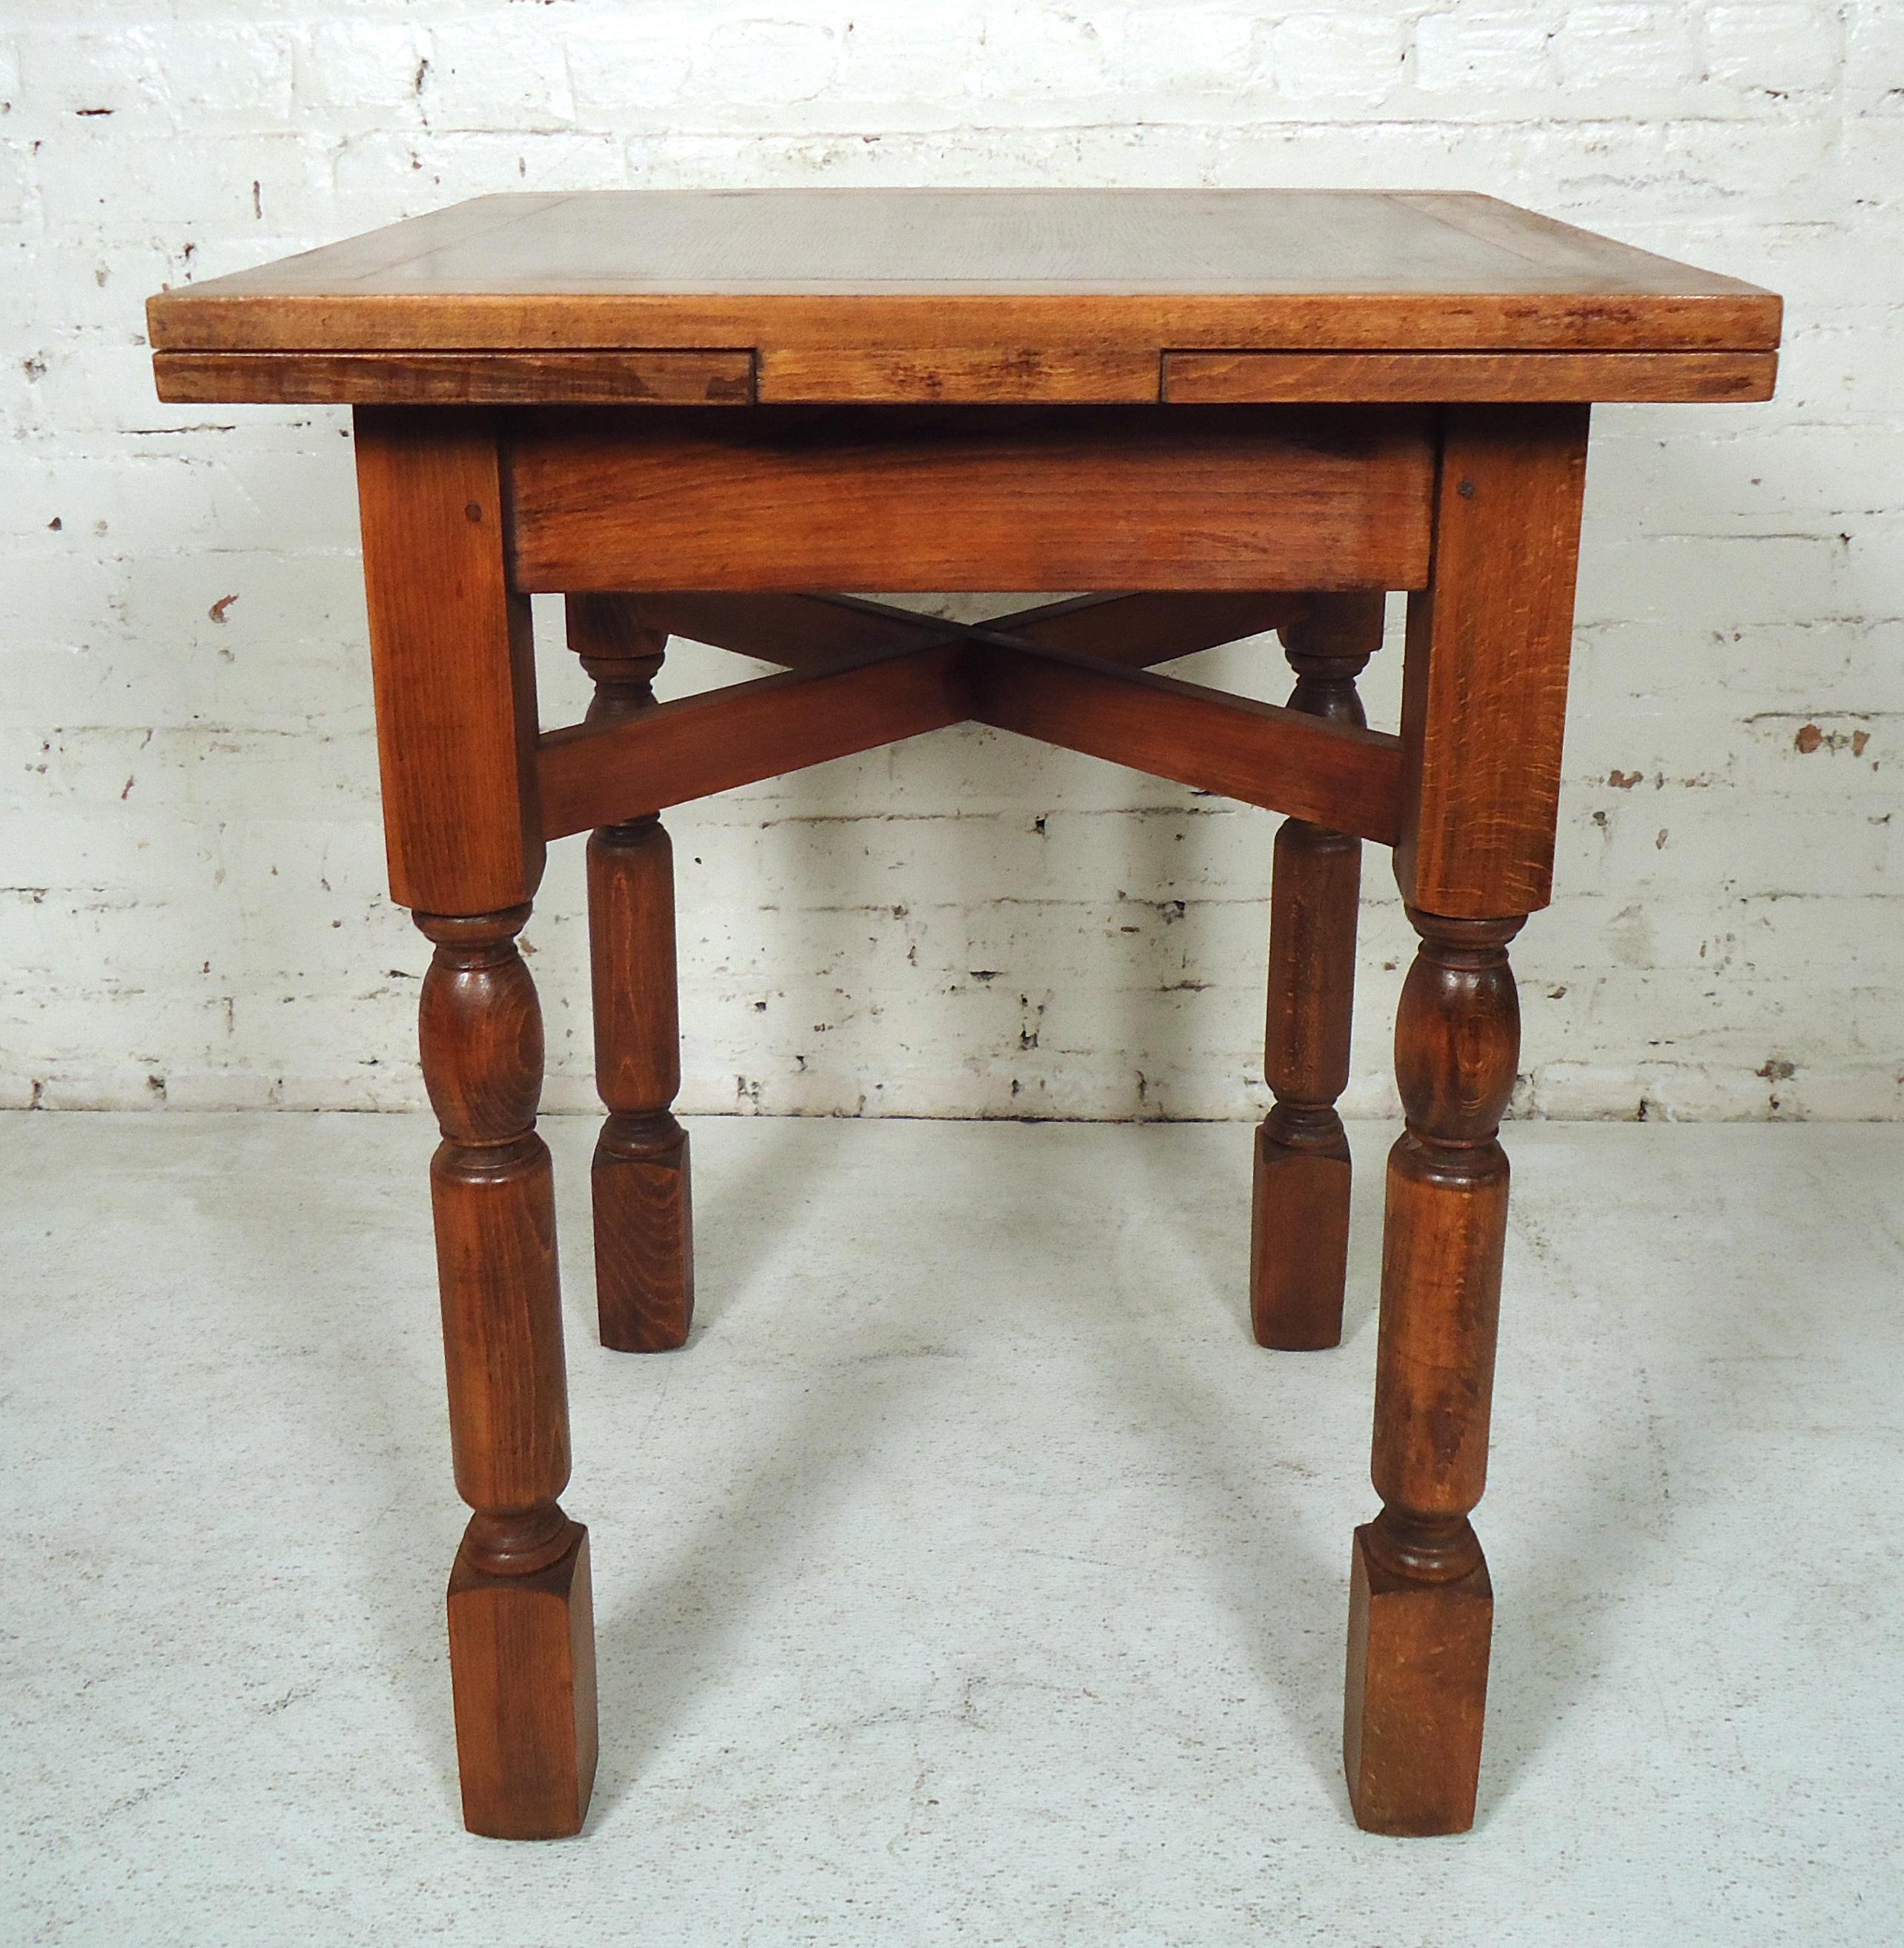 Vintage antique dining table features a square top, extendable leaves, and sturdy legs. Two 9